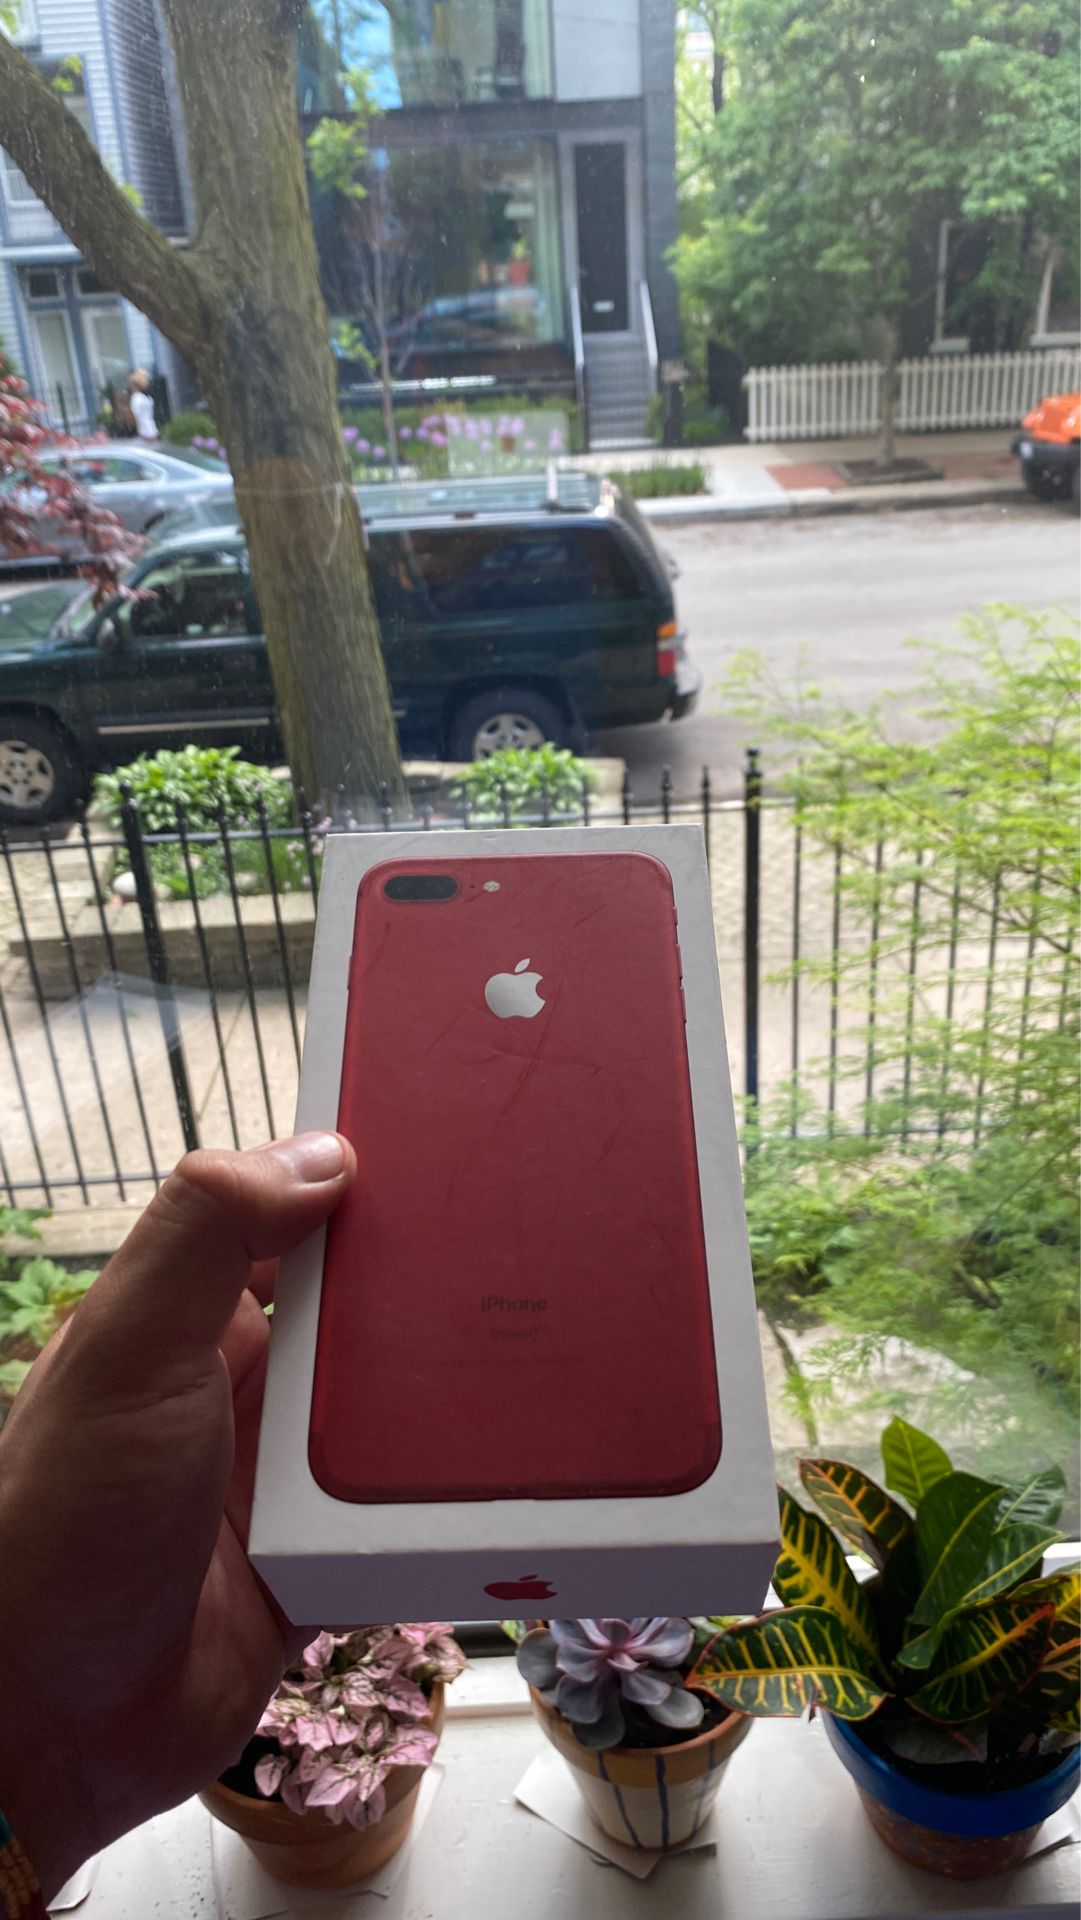 iPhone 7 Plus 128gb (Special edition Red)